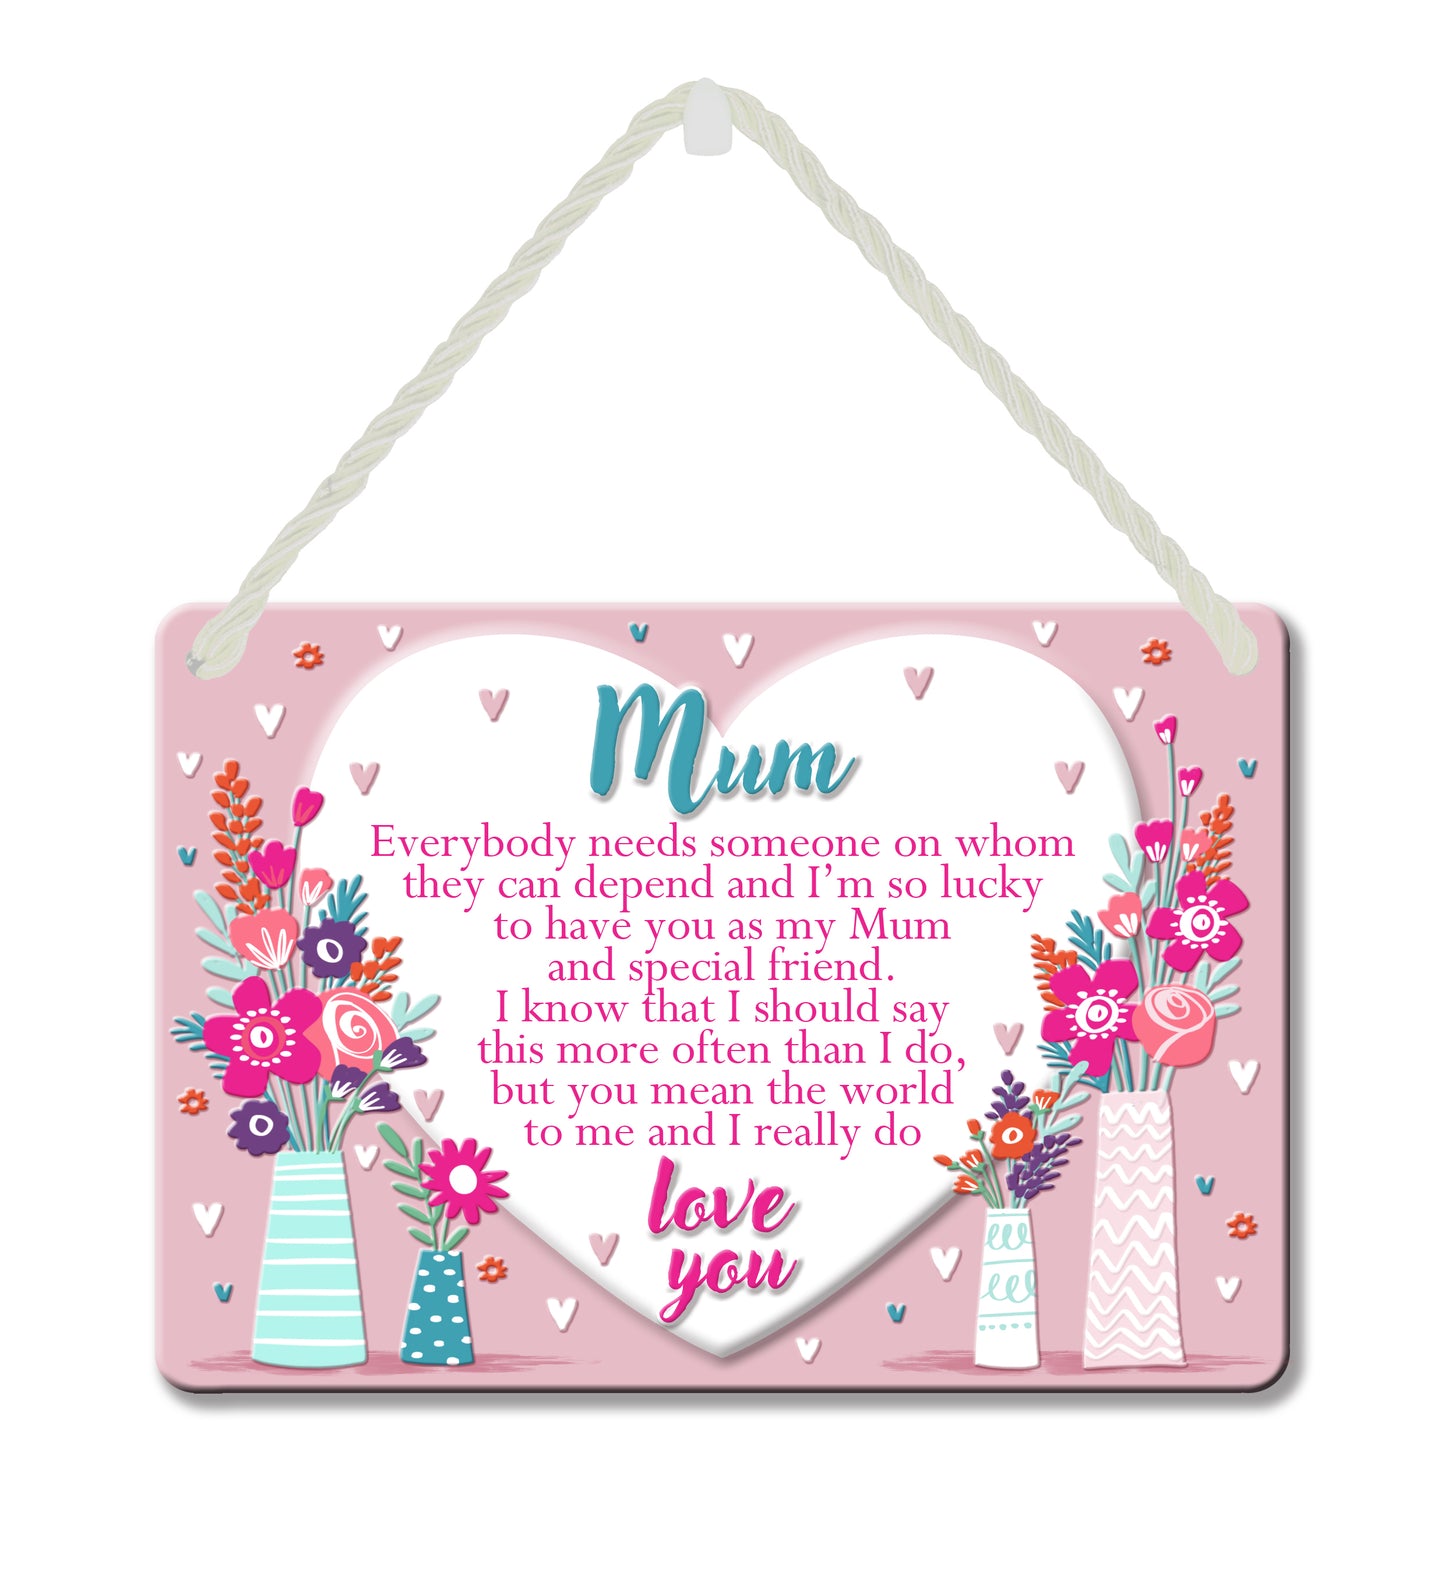 Mum I'm So Lucky To Have You As My Mum Tin Hanging Plaque